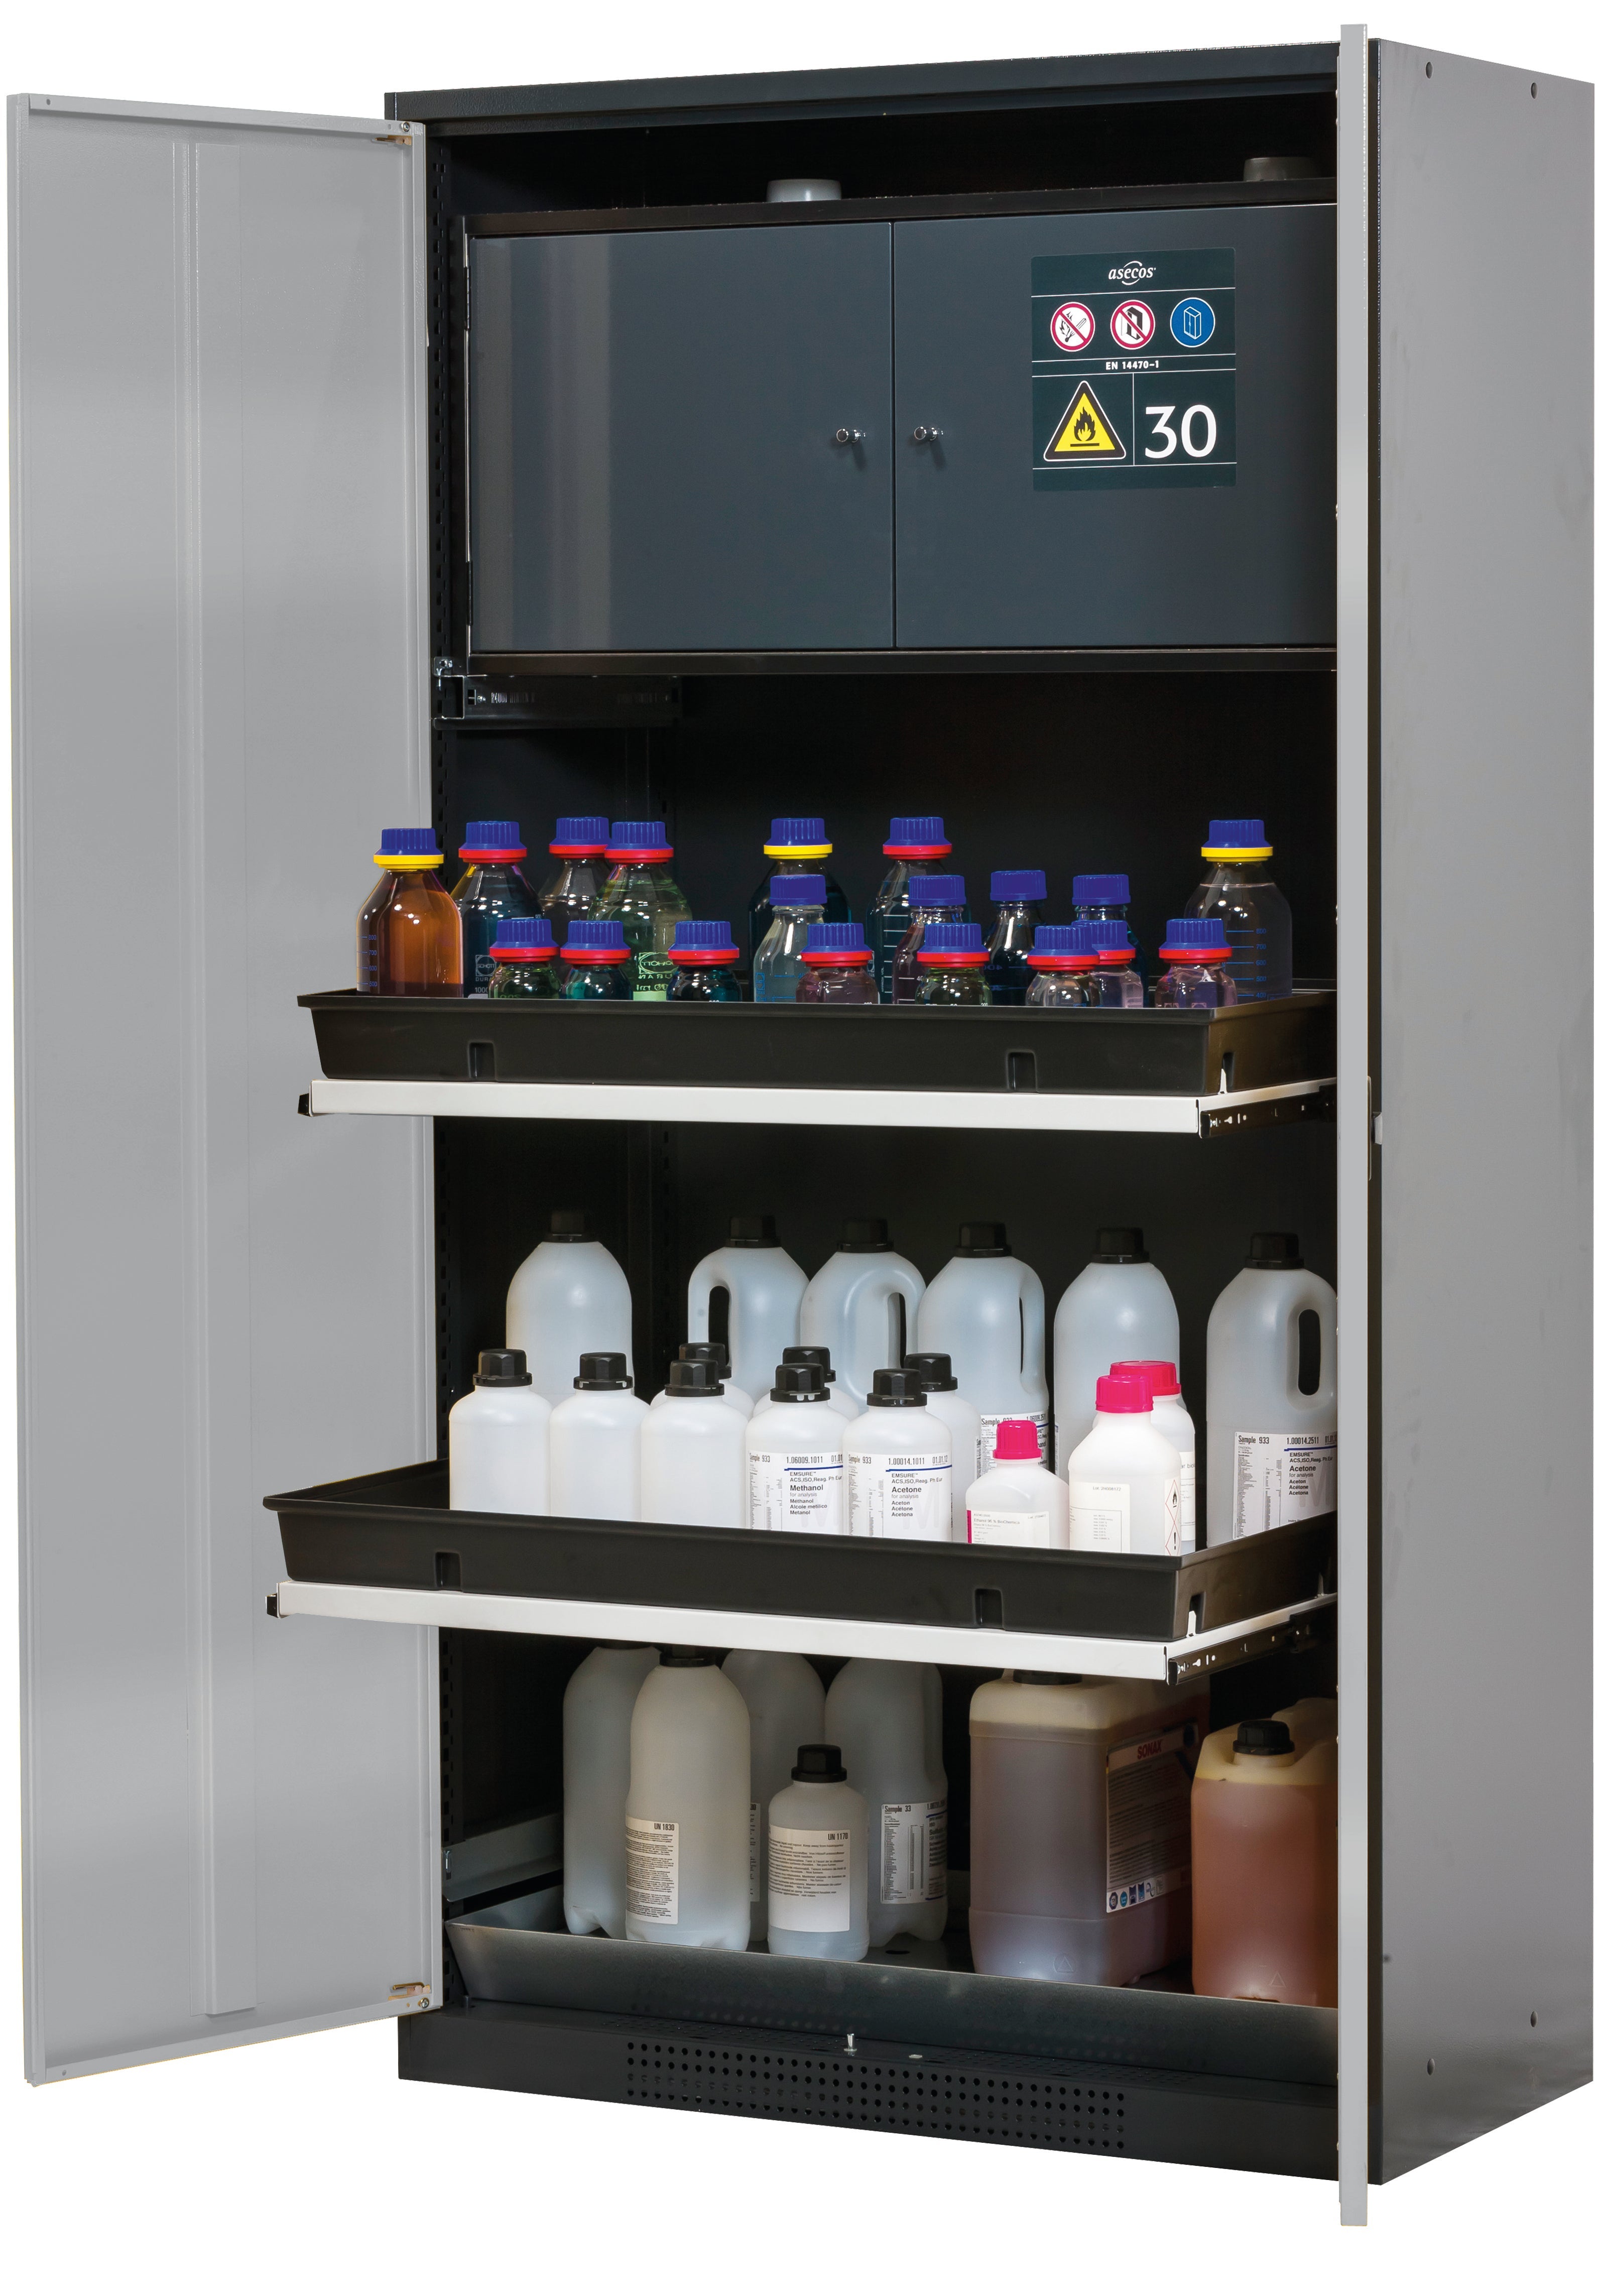 Chemical cabinet with type 30 safety box CS-CLASSIC-F model CS.195.105.F in asecos silver with 3x shelf pull-out AbZ (sheet steel/polypropylene)